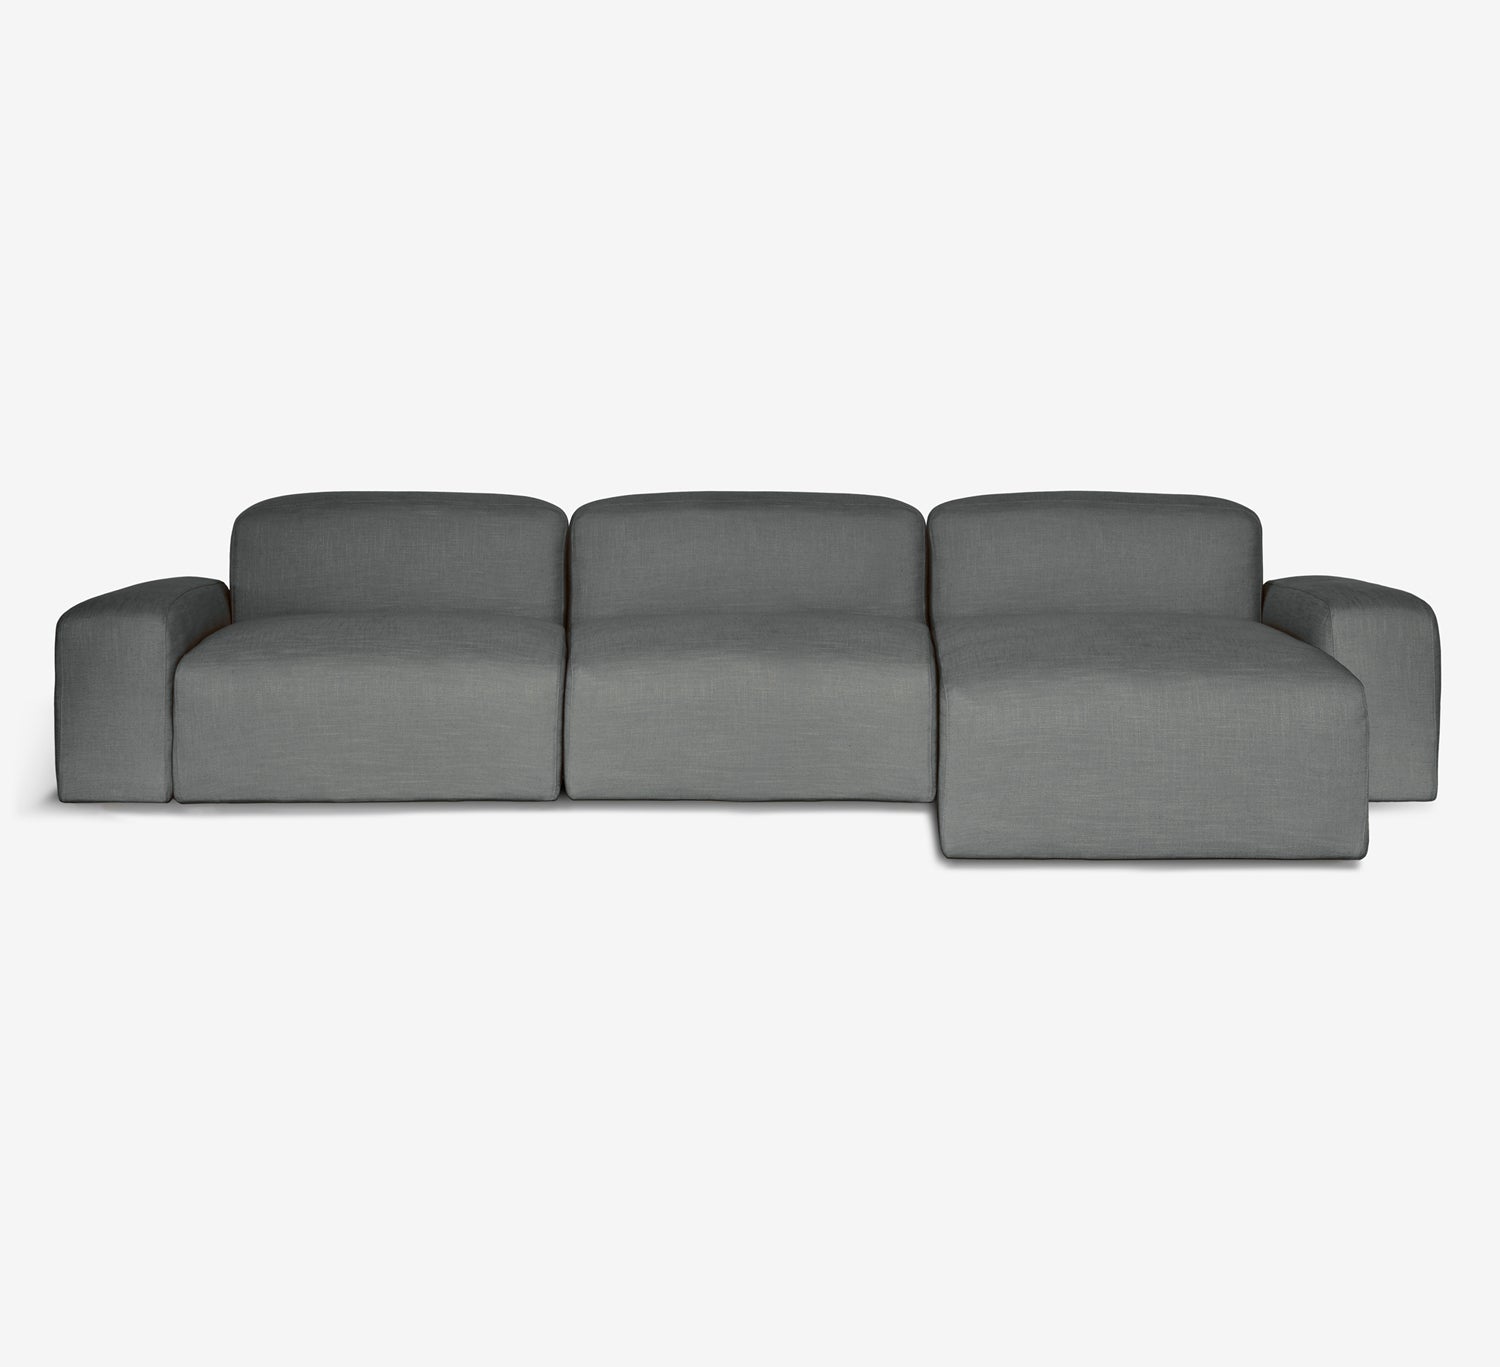 Comfortable seating with eco-friendly grey Libero